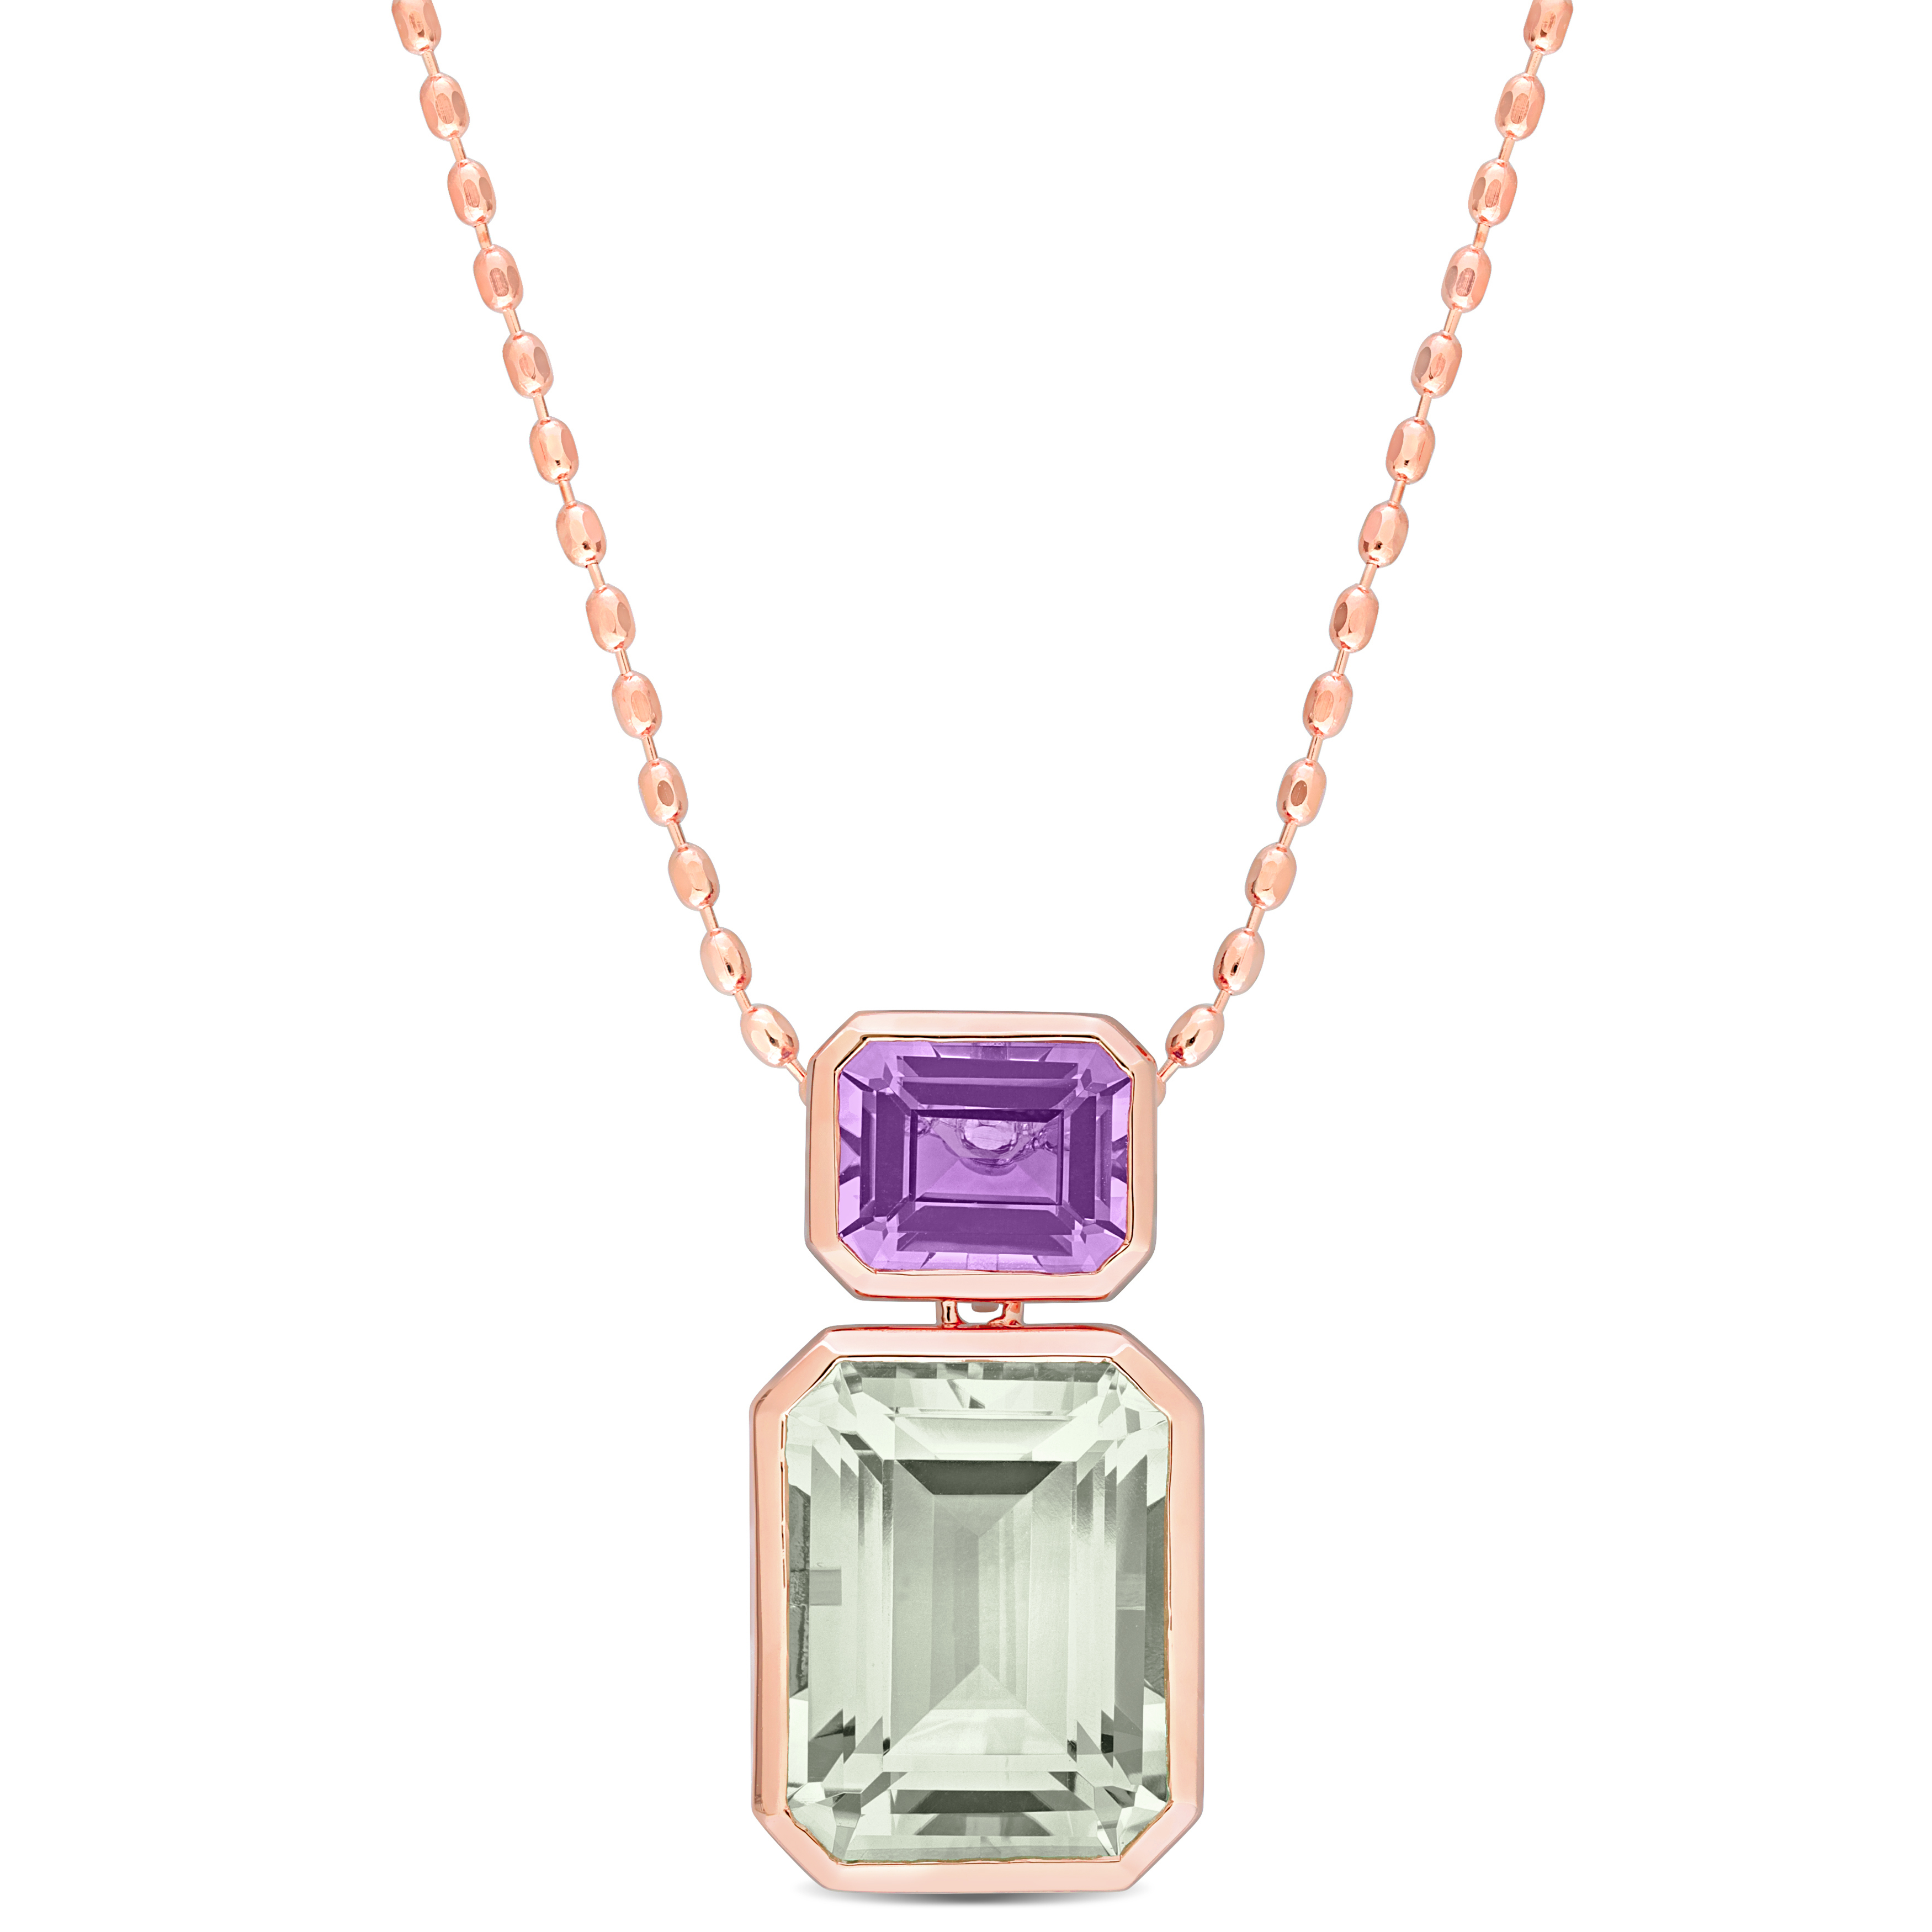 20 1/8 CT TGW Octagon Green Quartz and Rose de France Necklace in Rose Plated Sterling Silver